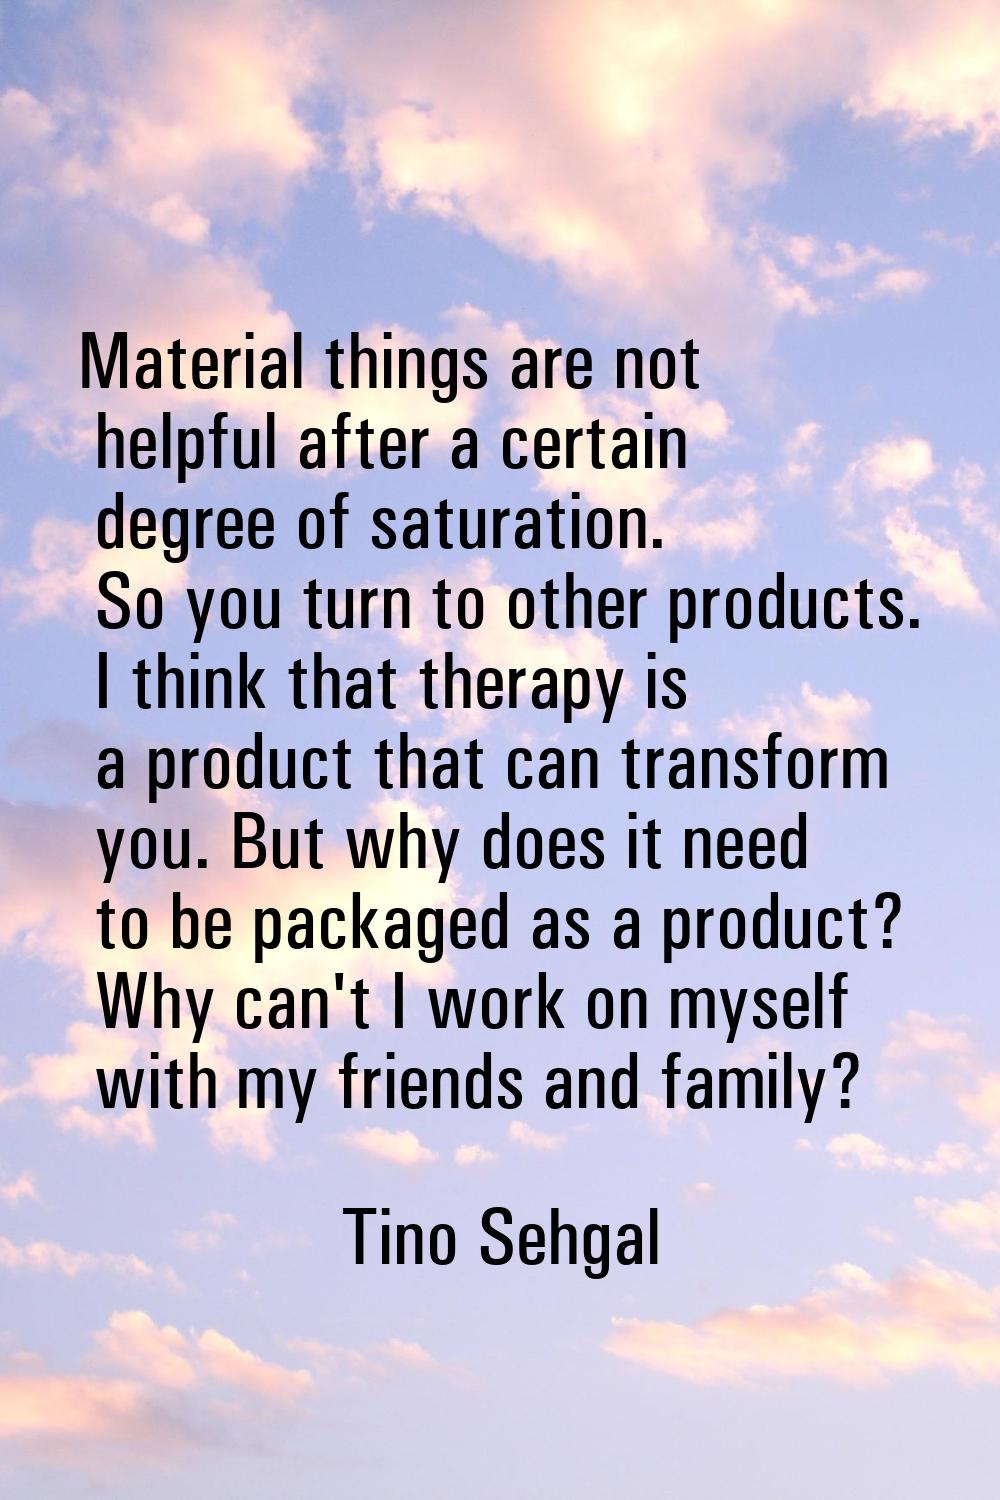 Material things are not helpful after a certain degree of saturation. So you turn to other products